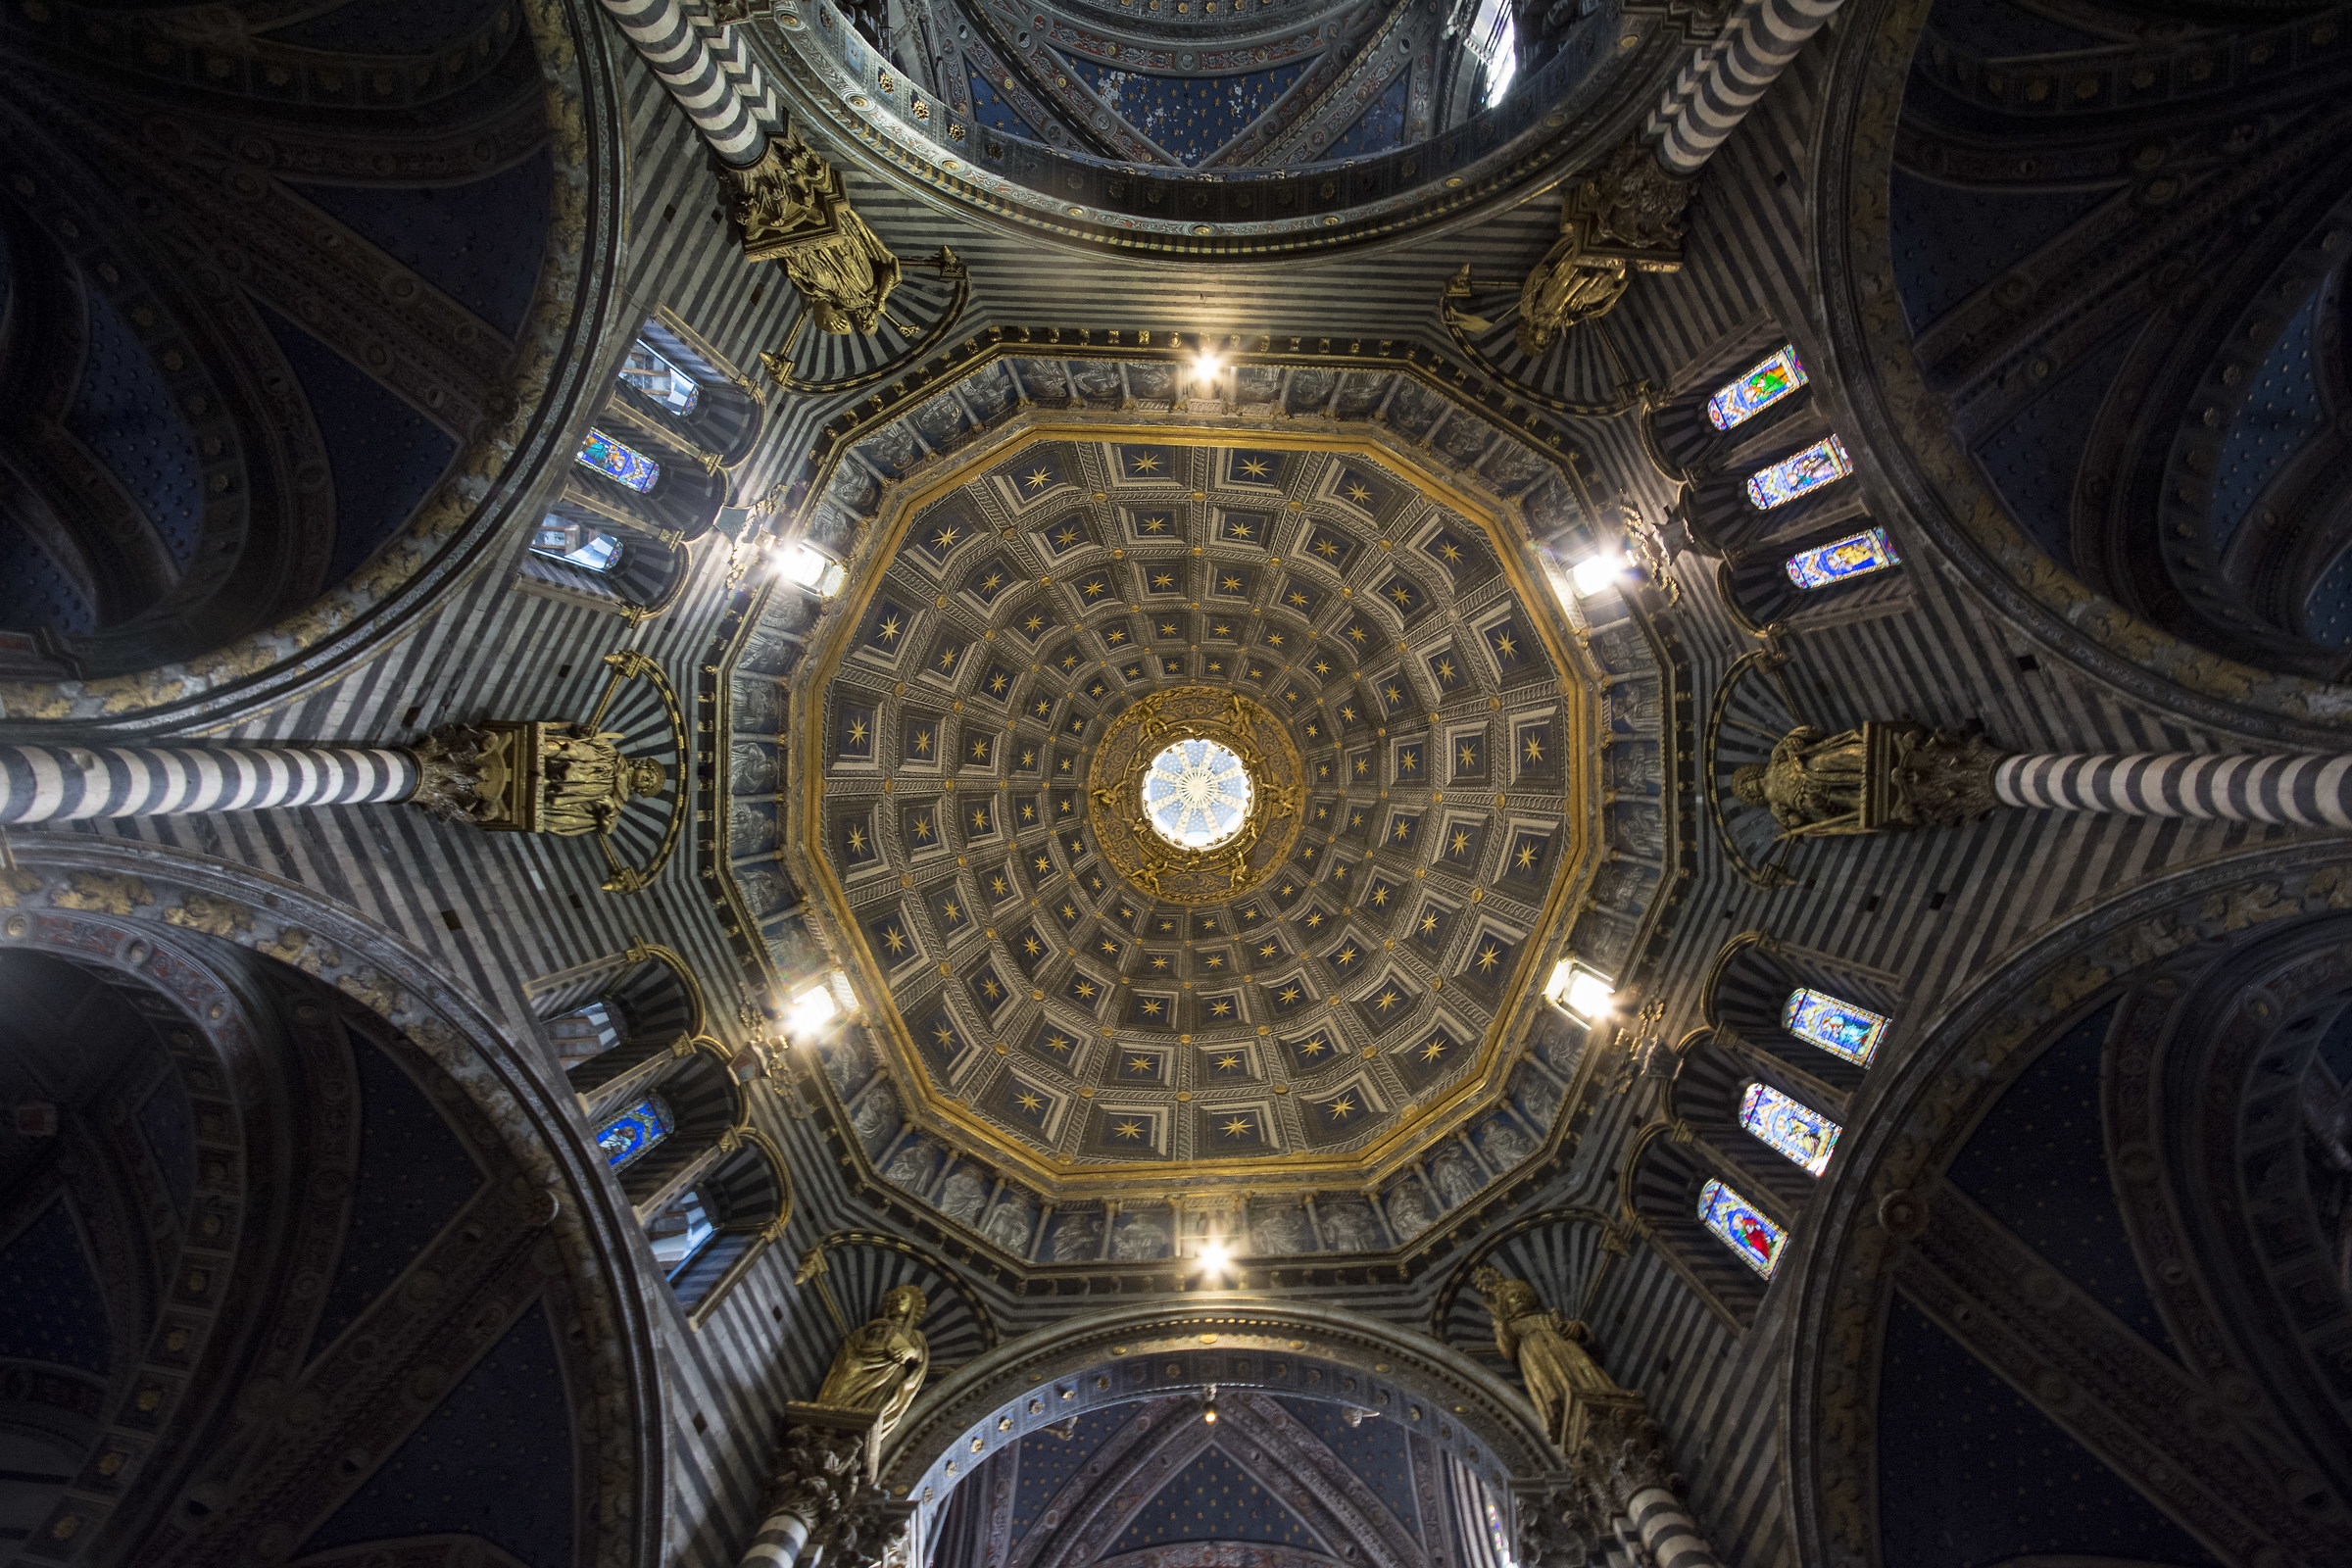 the dome of the Duomo of Siena...